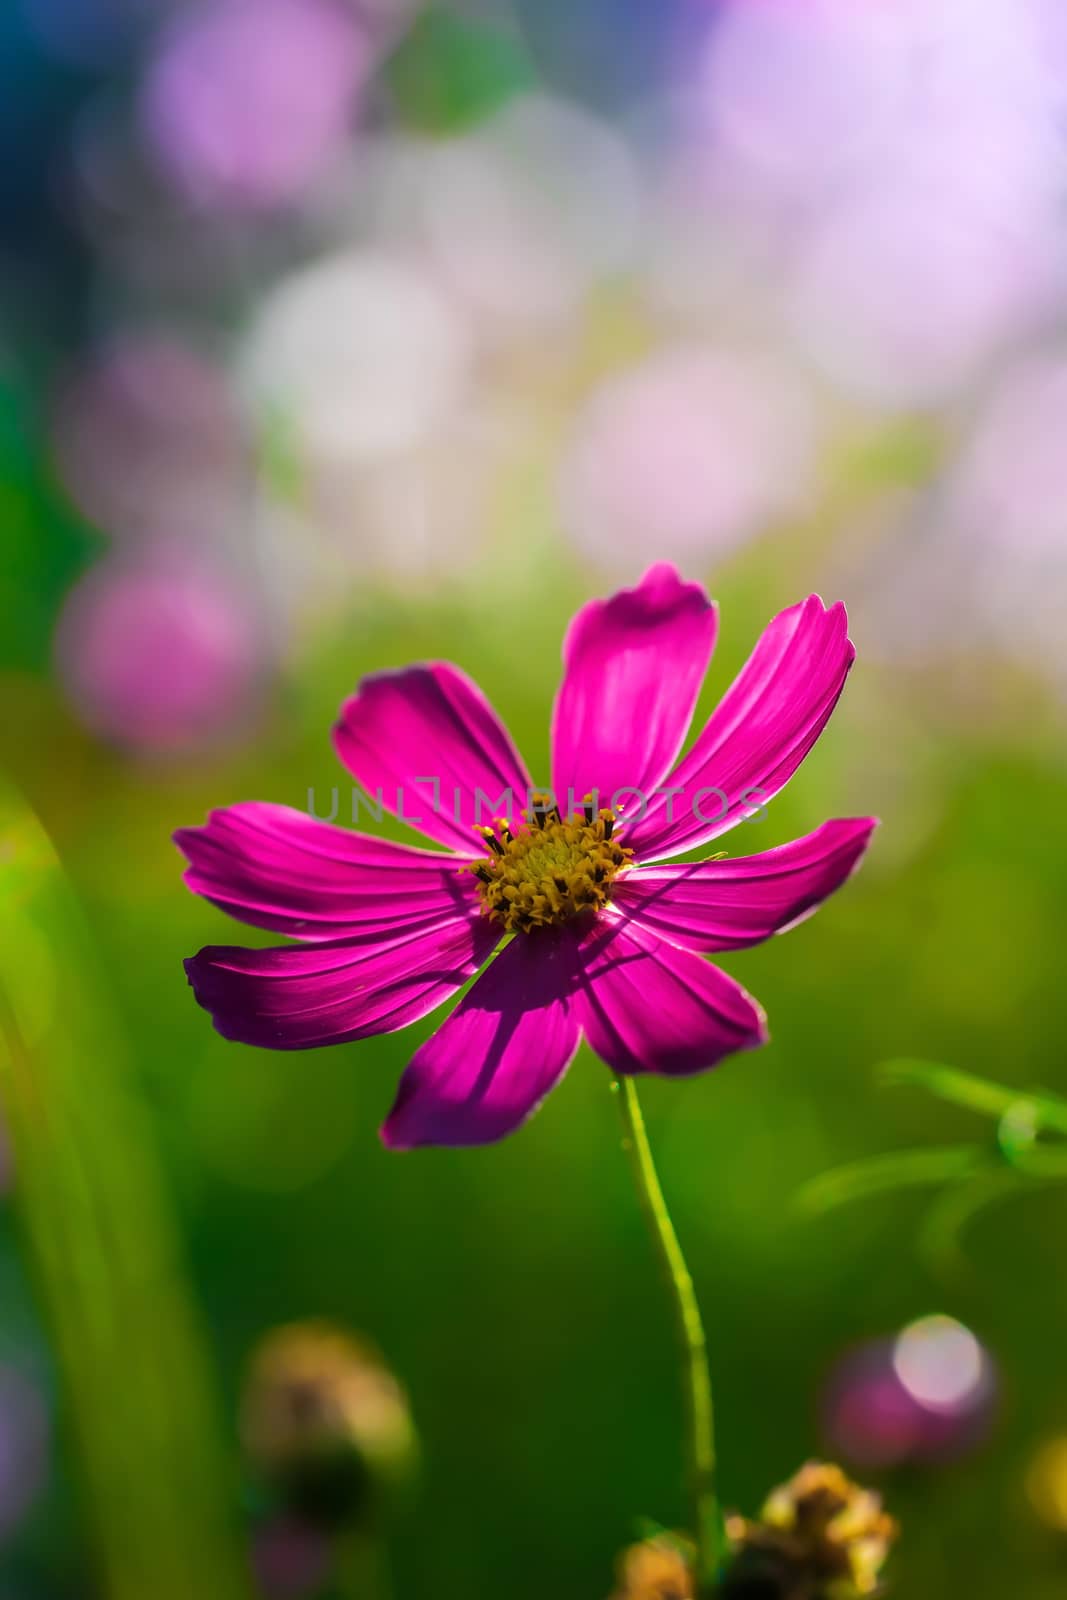 Cosmos flower Cosmos Bipinnatus with blurred background.